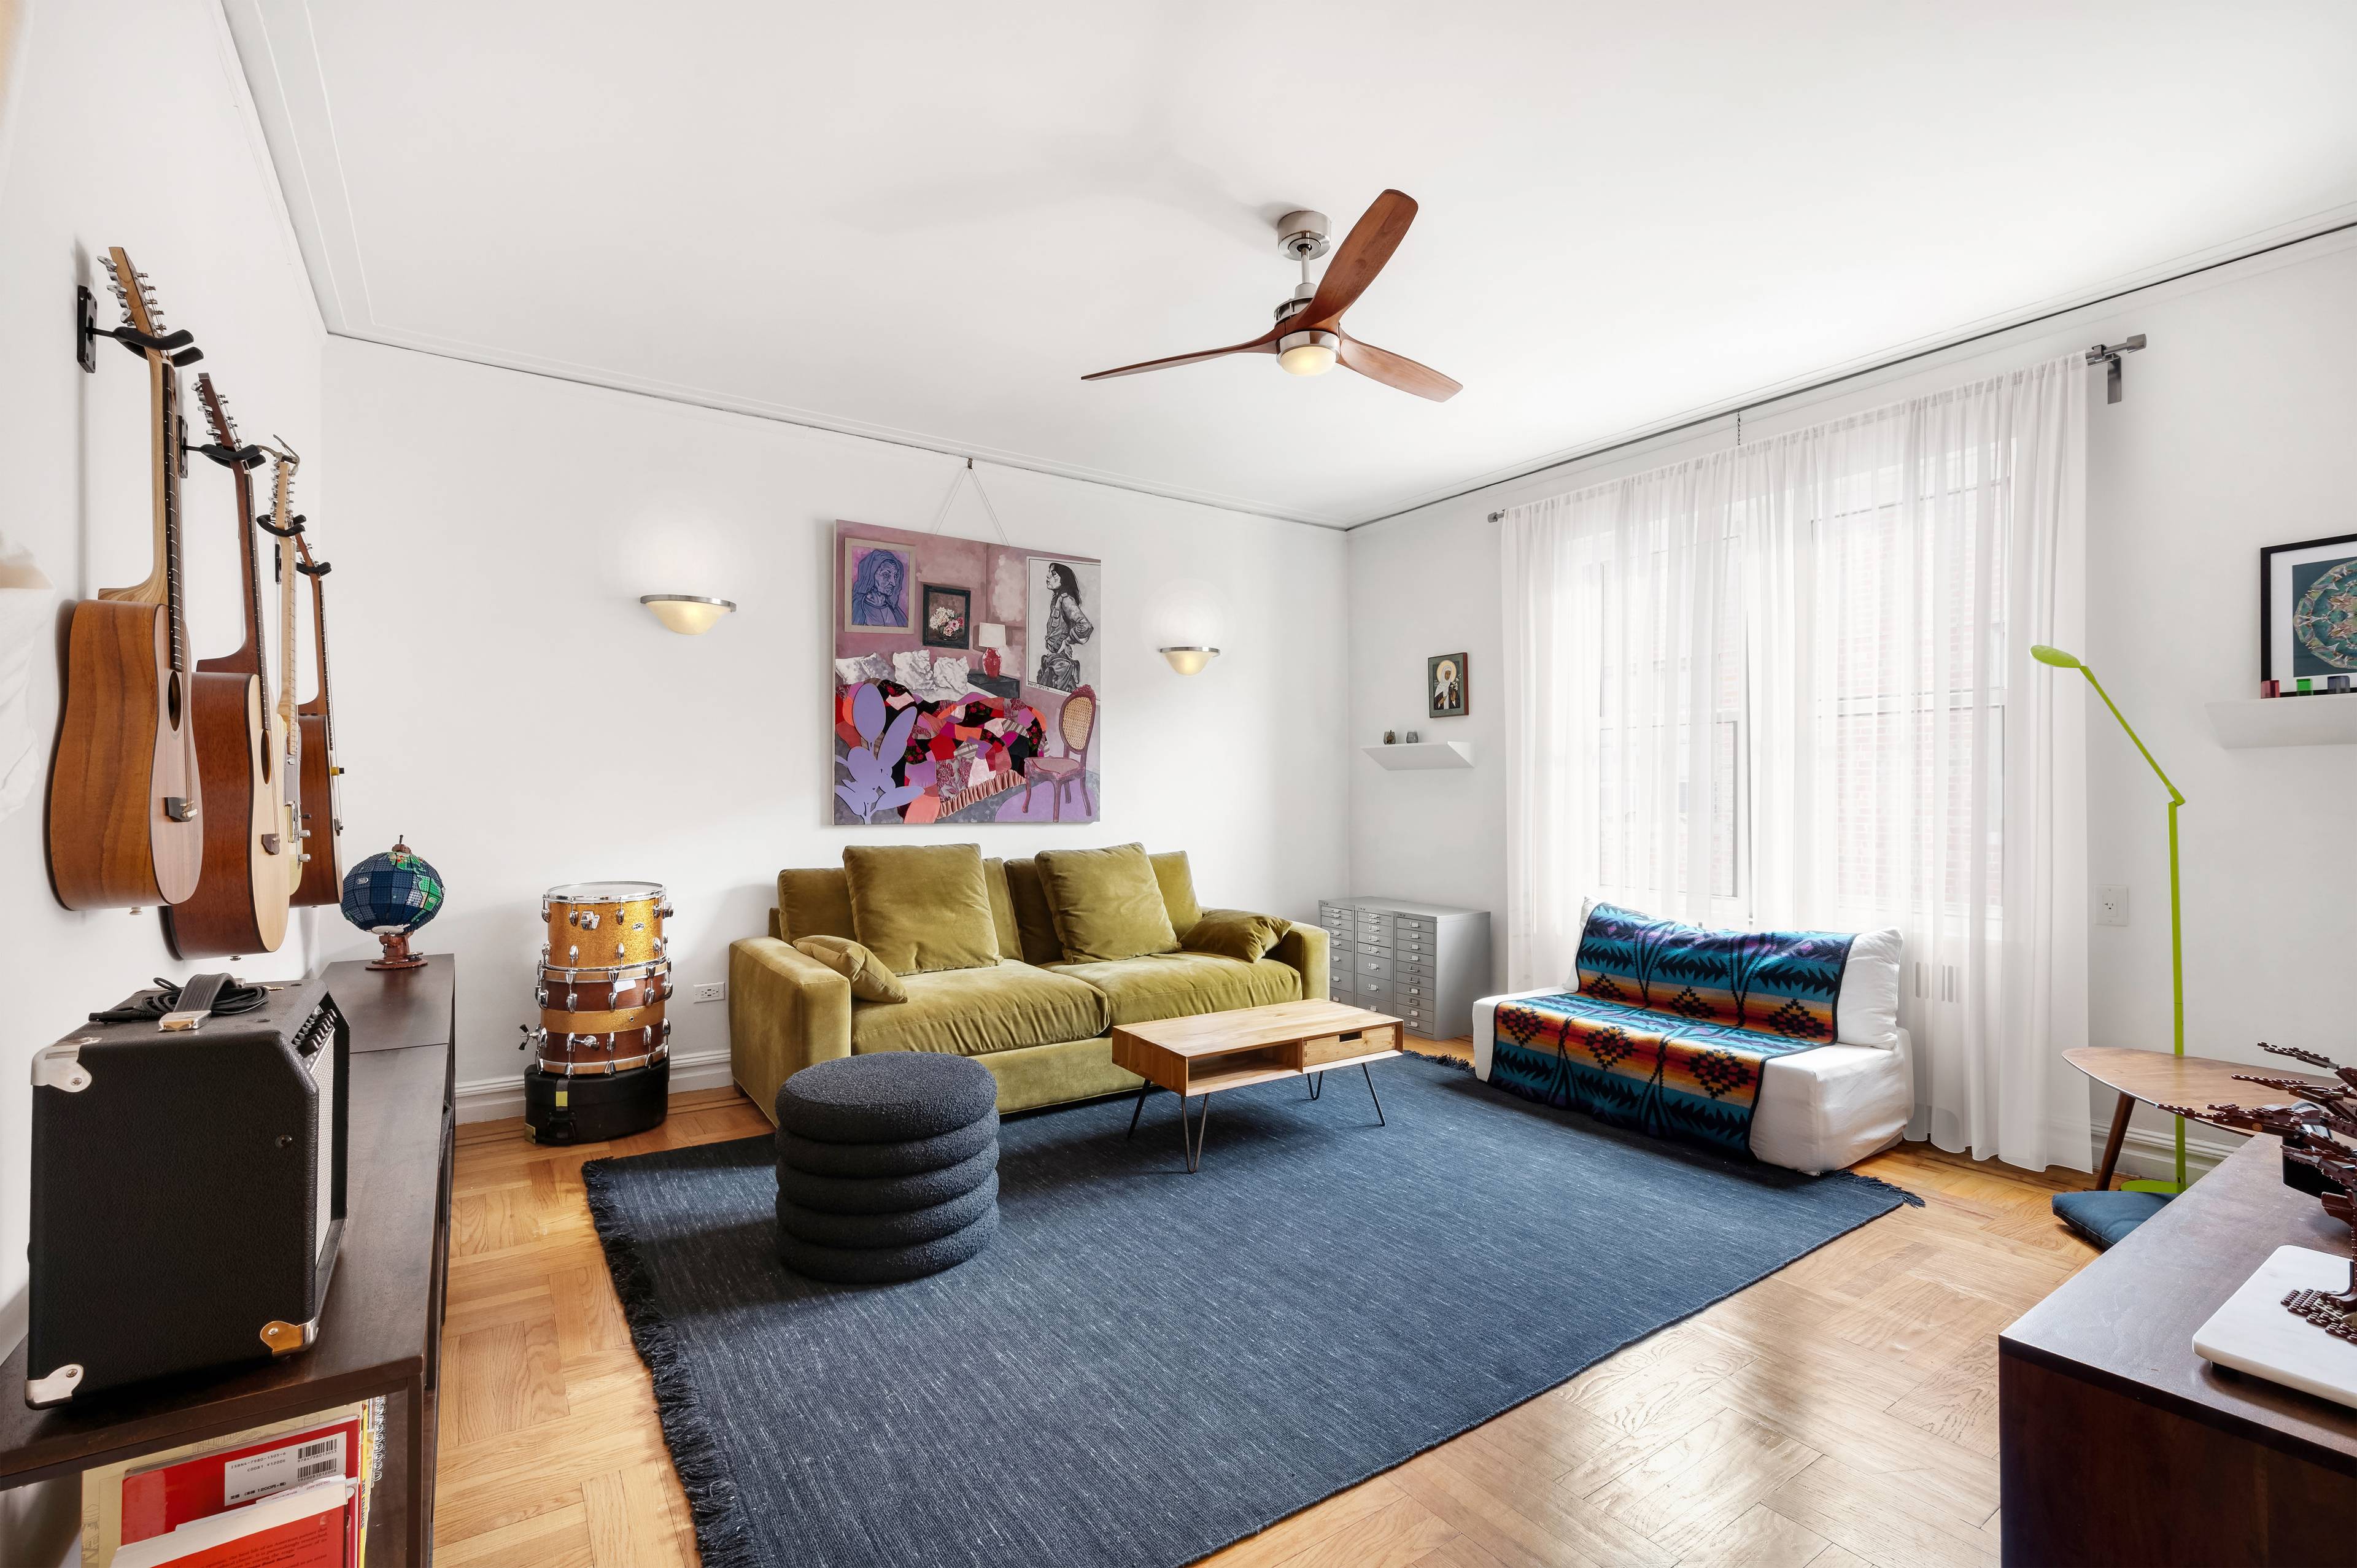 NEW TO MARKET ! The SUN SOAKED TOP floor, LOW maintenance Inwood one bedroom we've all been waiting for, nestled only a block from the A Express, glorious weekly farmer's ...